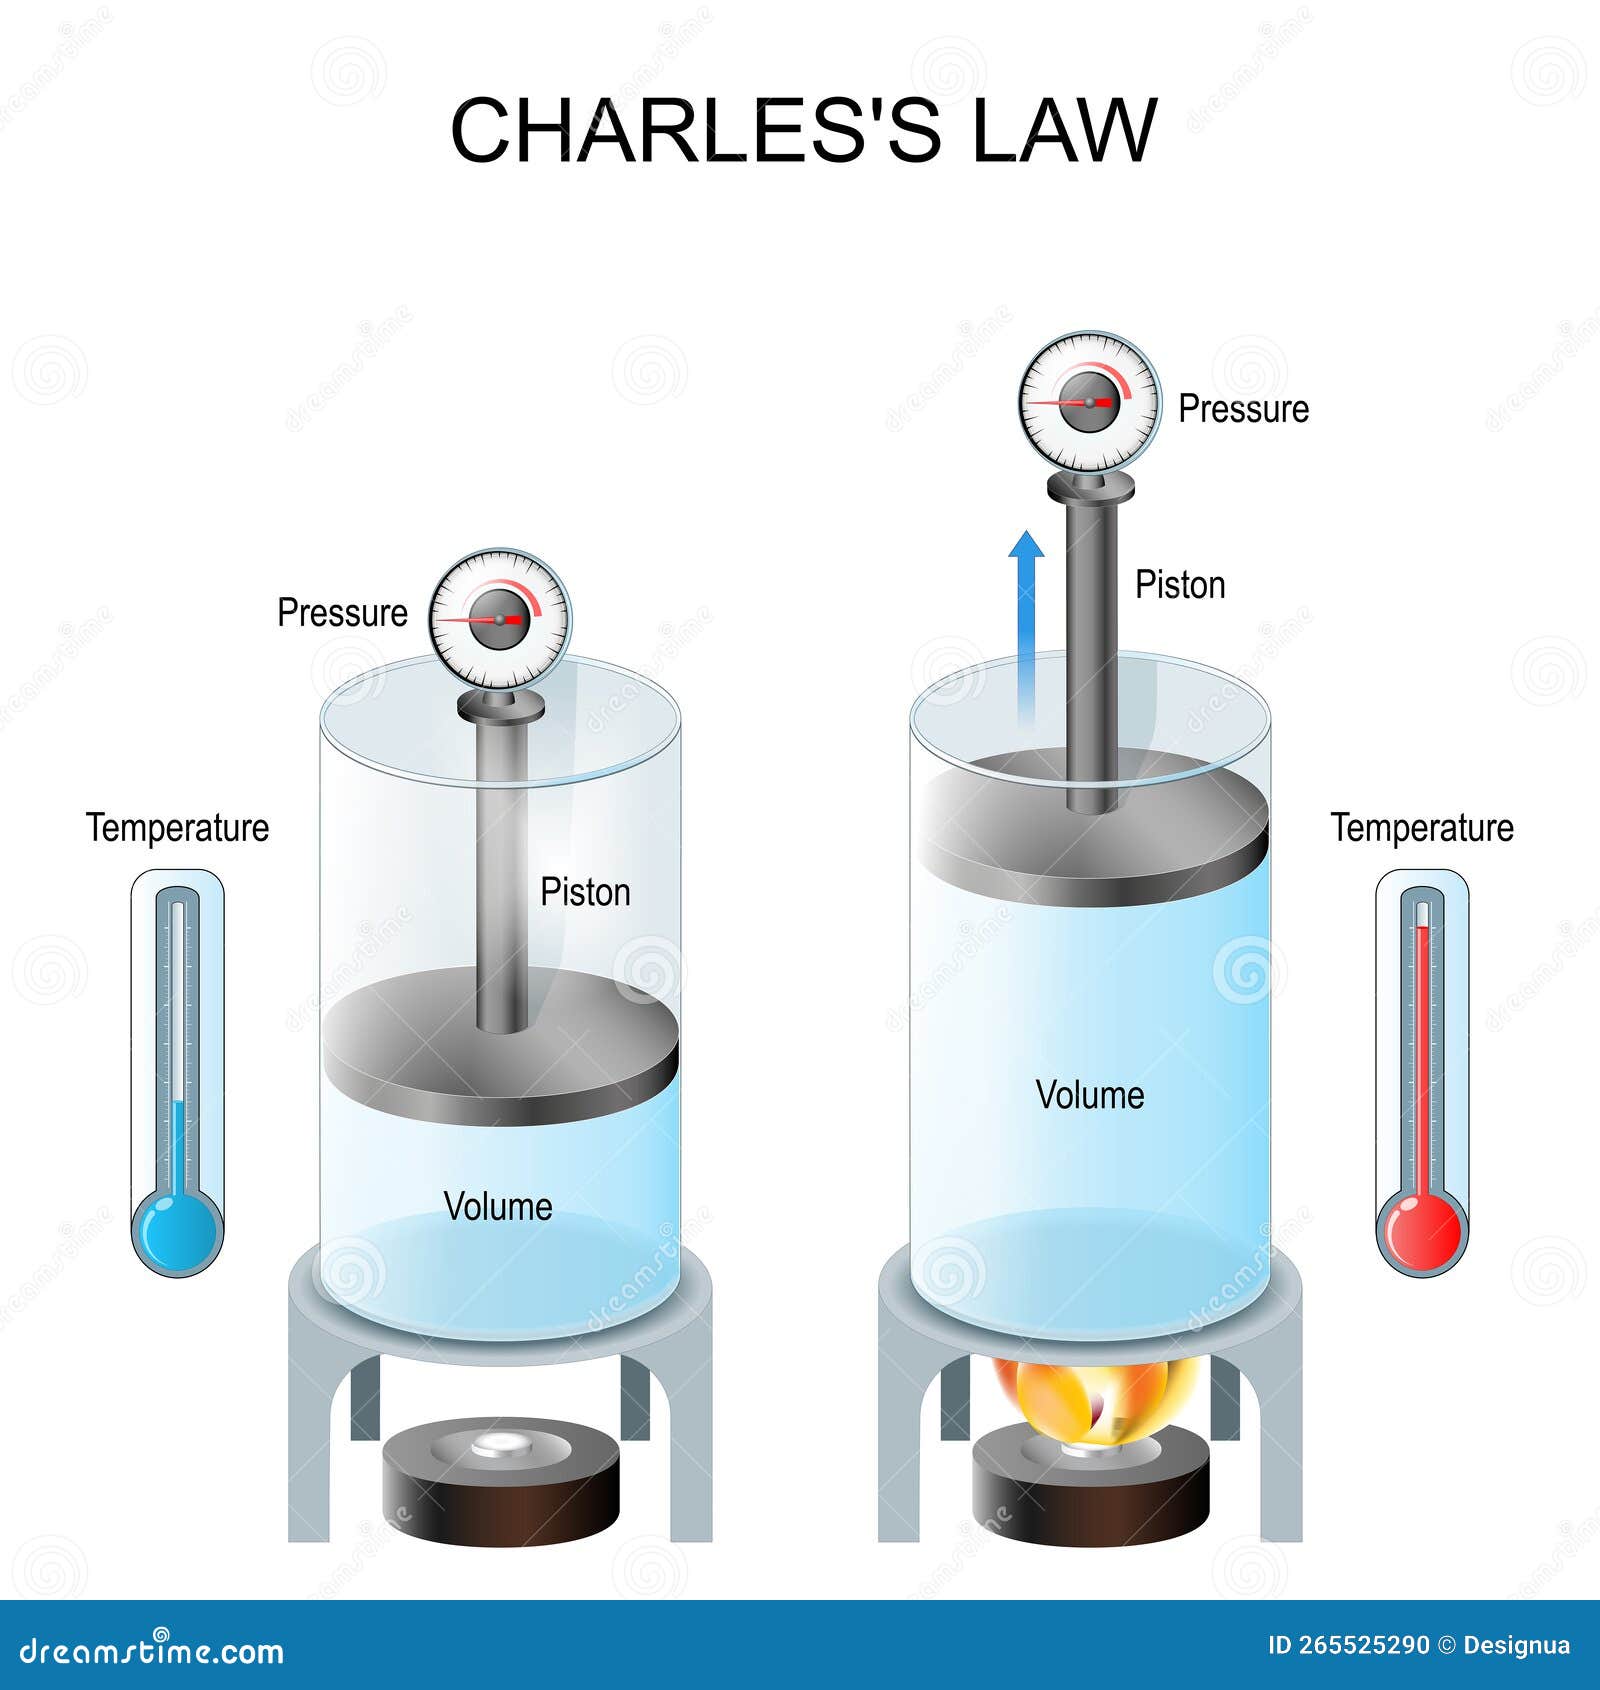 charles`s law. law of volumes. gases tend to expand when heated. experiment